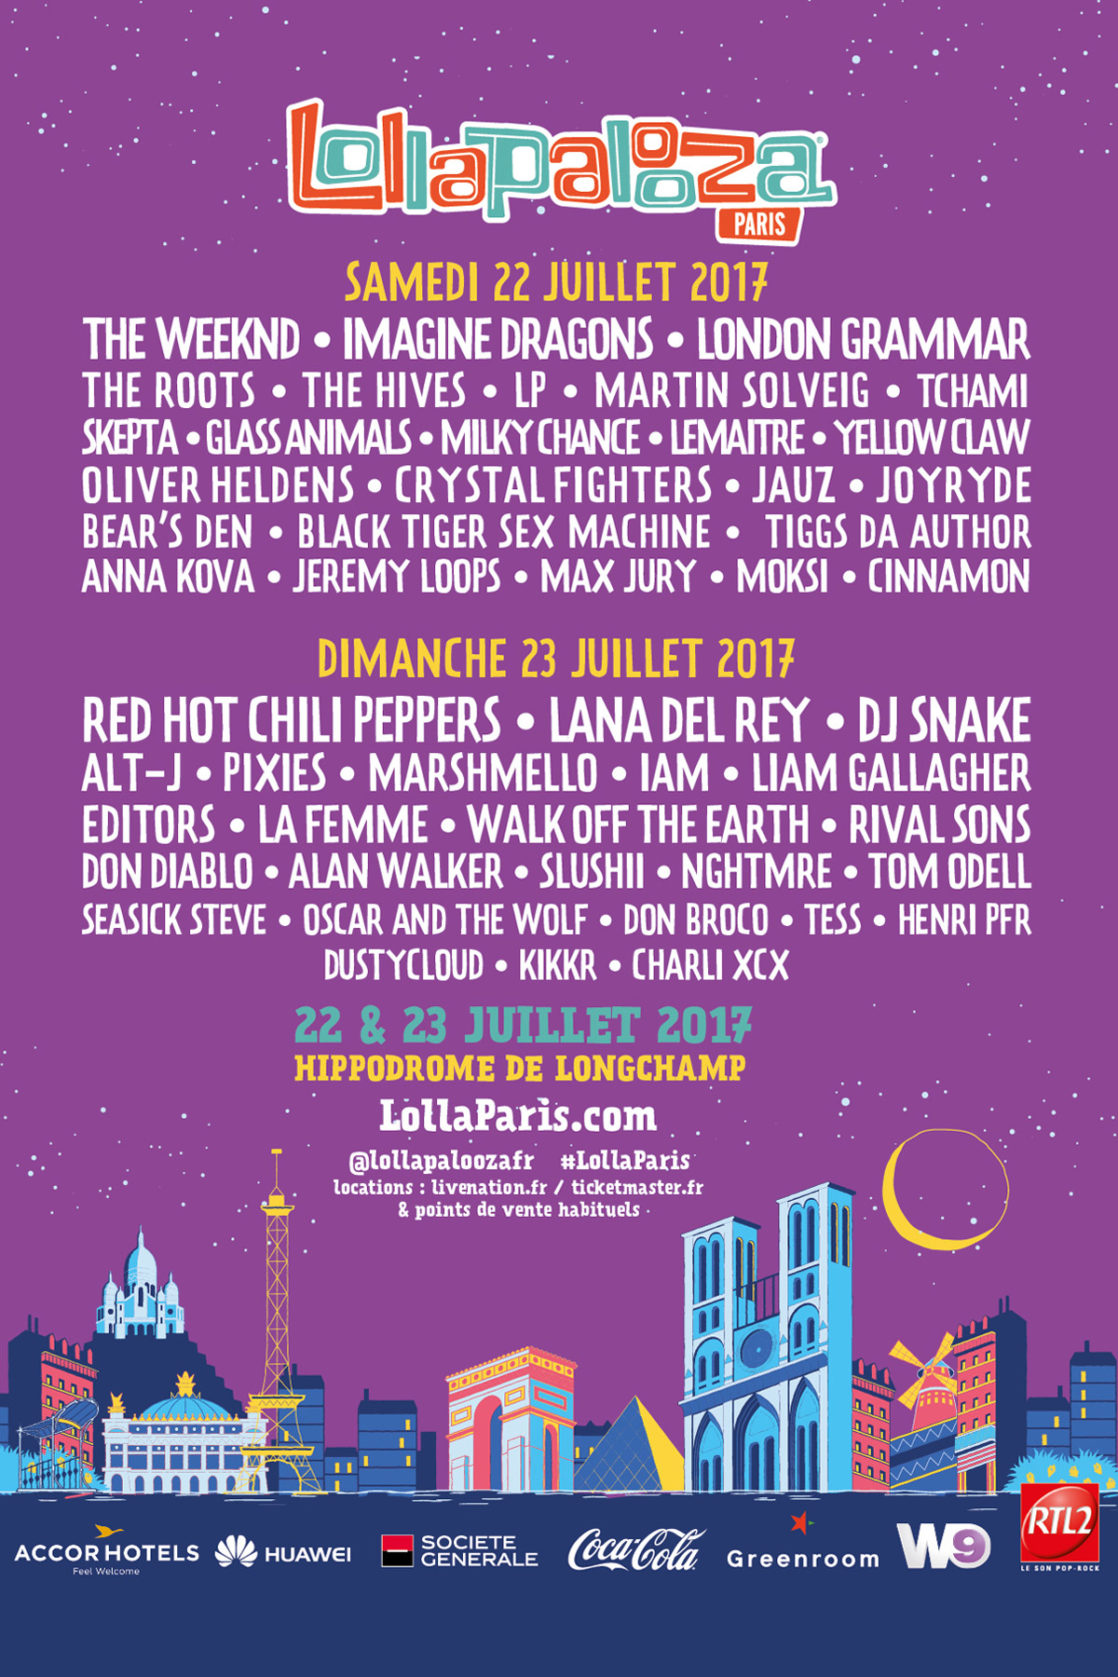 Win a pair of tickets to Lollapalooza in Paris